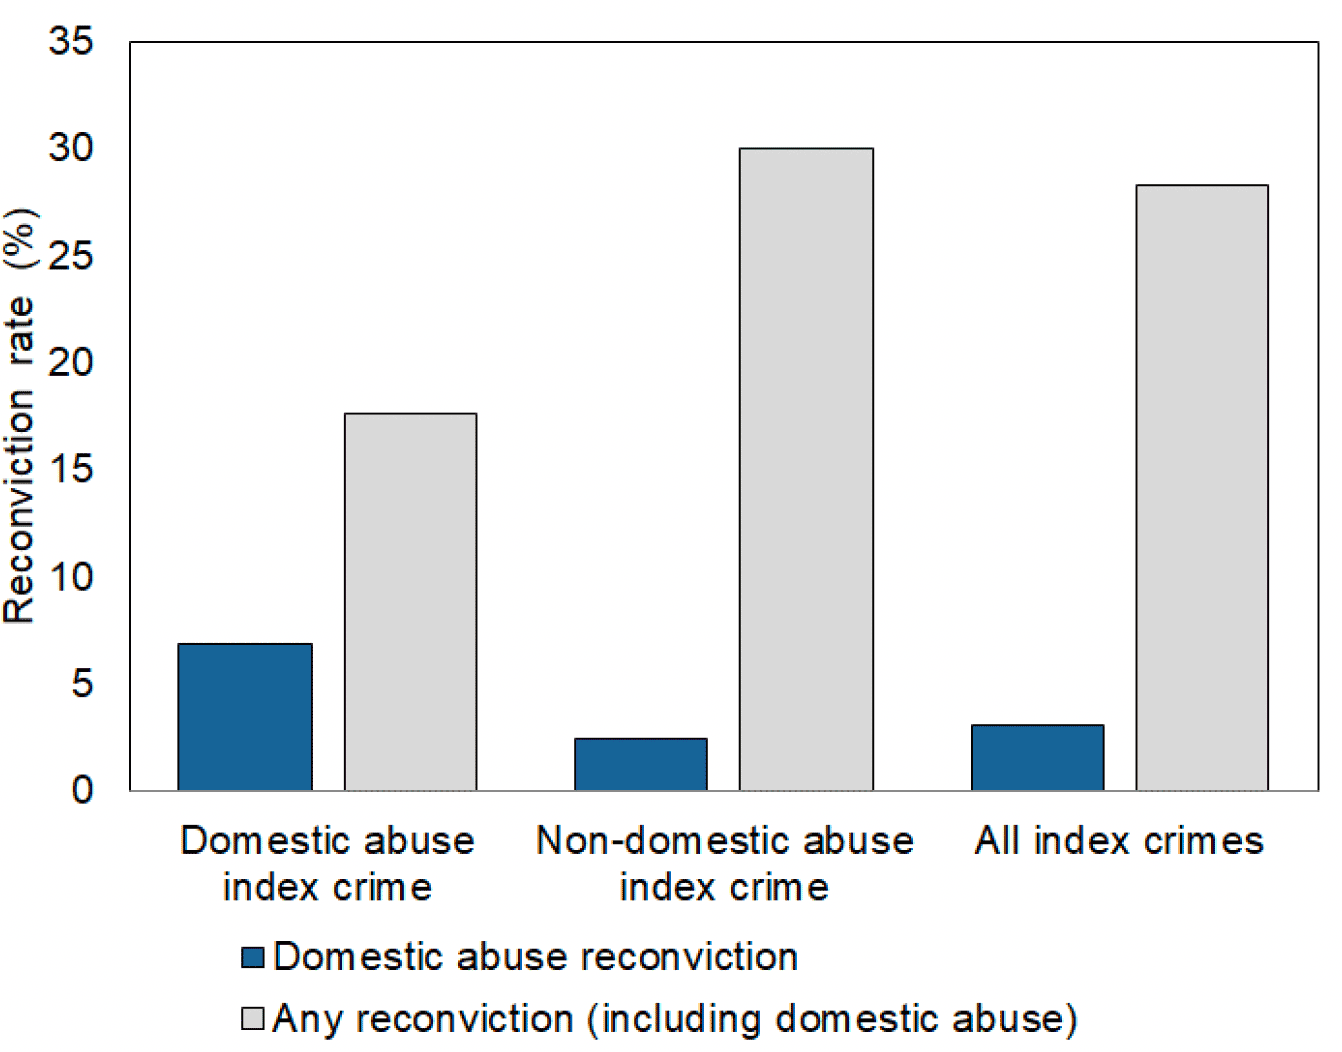 Bar chart showing reconviction rates for domestic abuse crimes and offences in 2018-19 